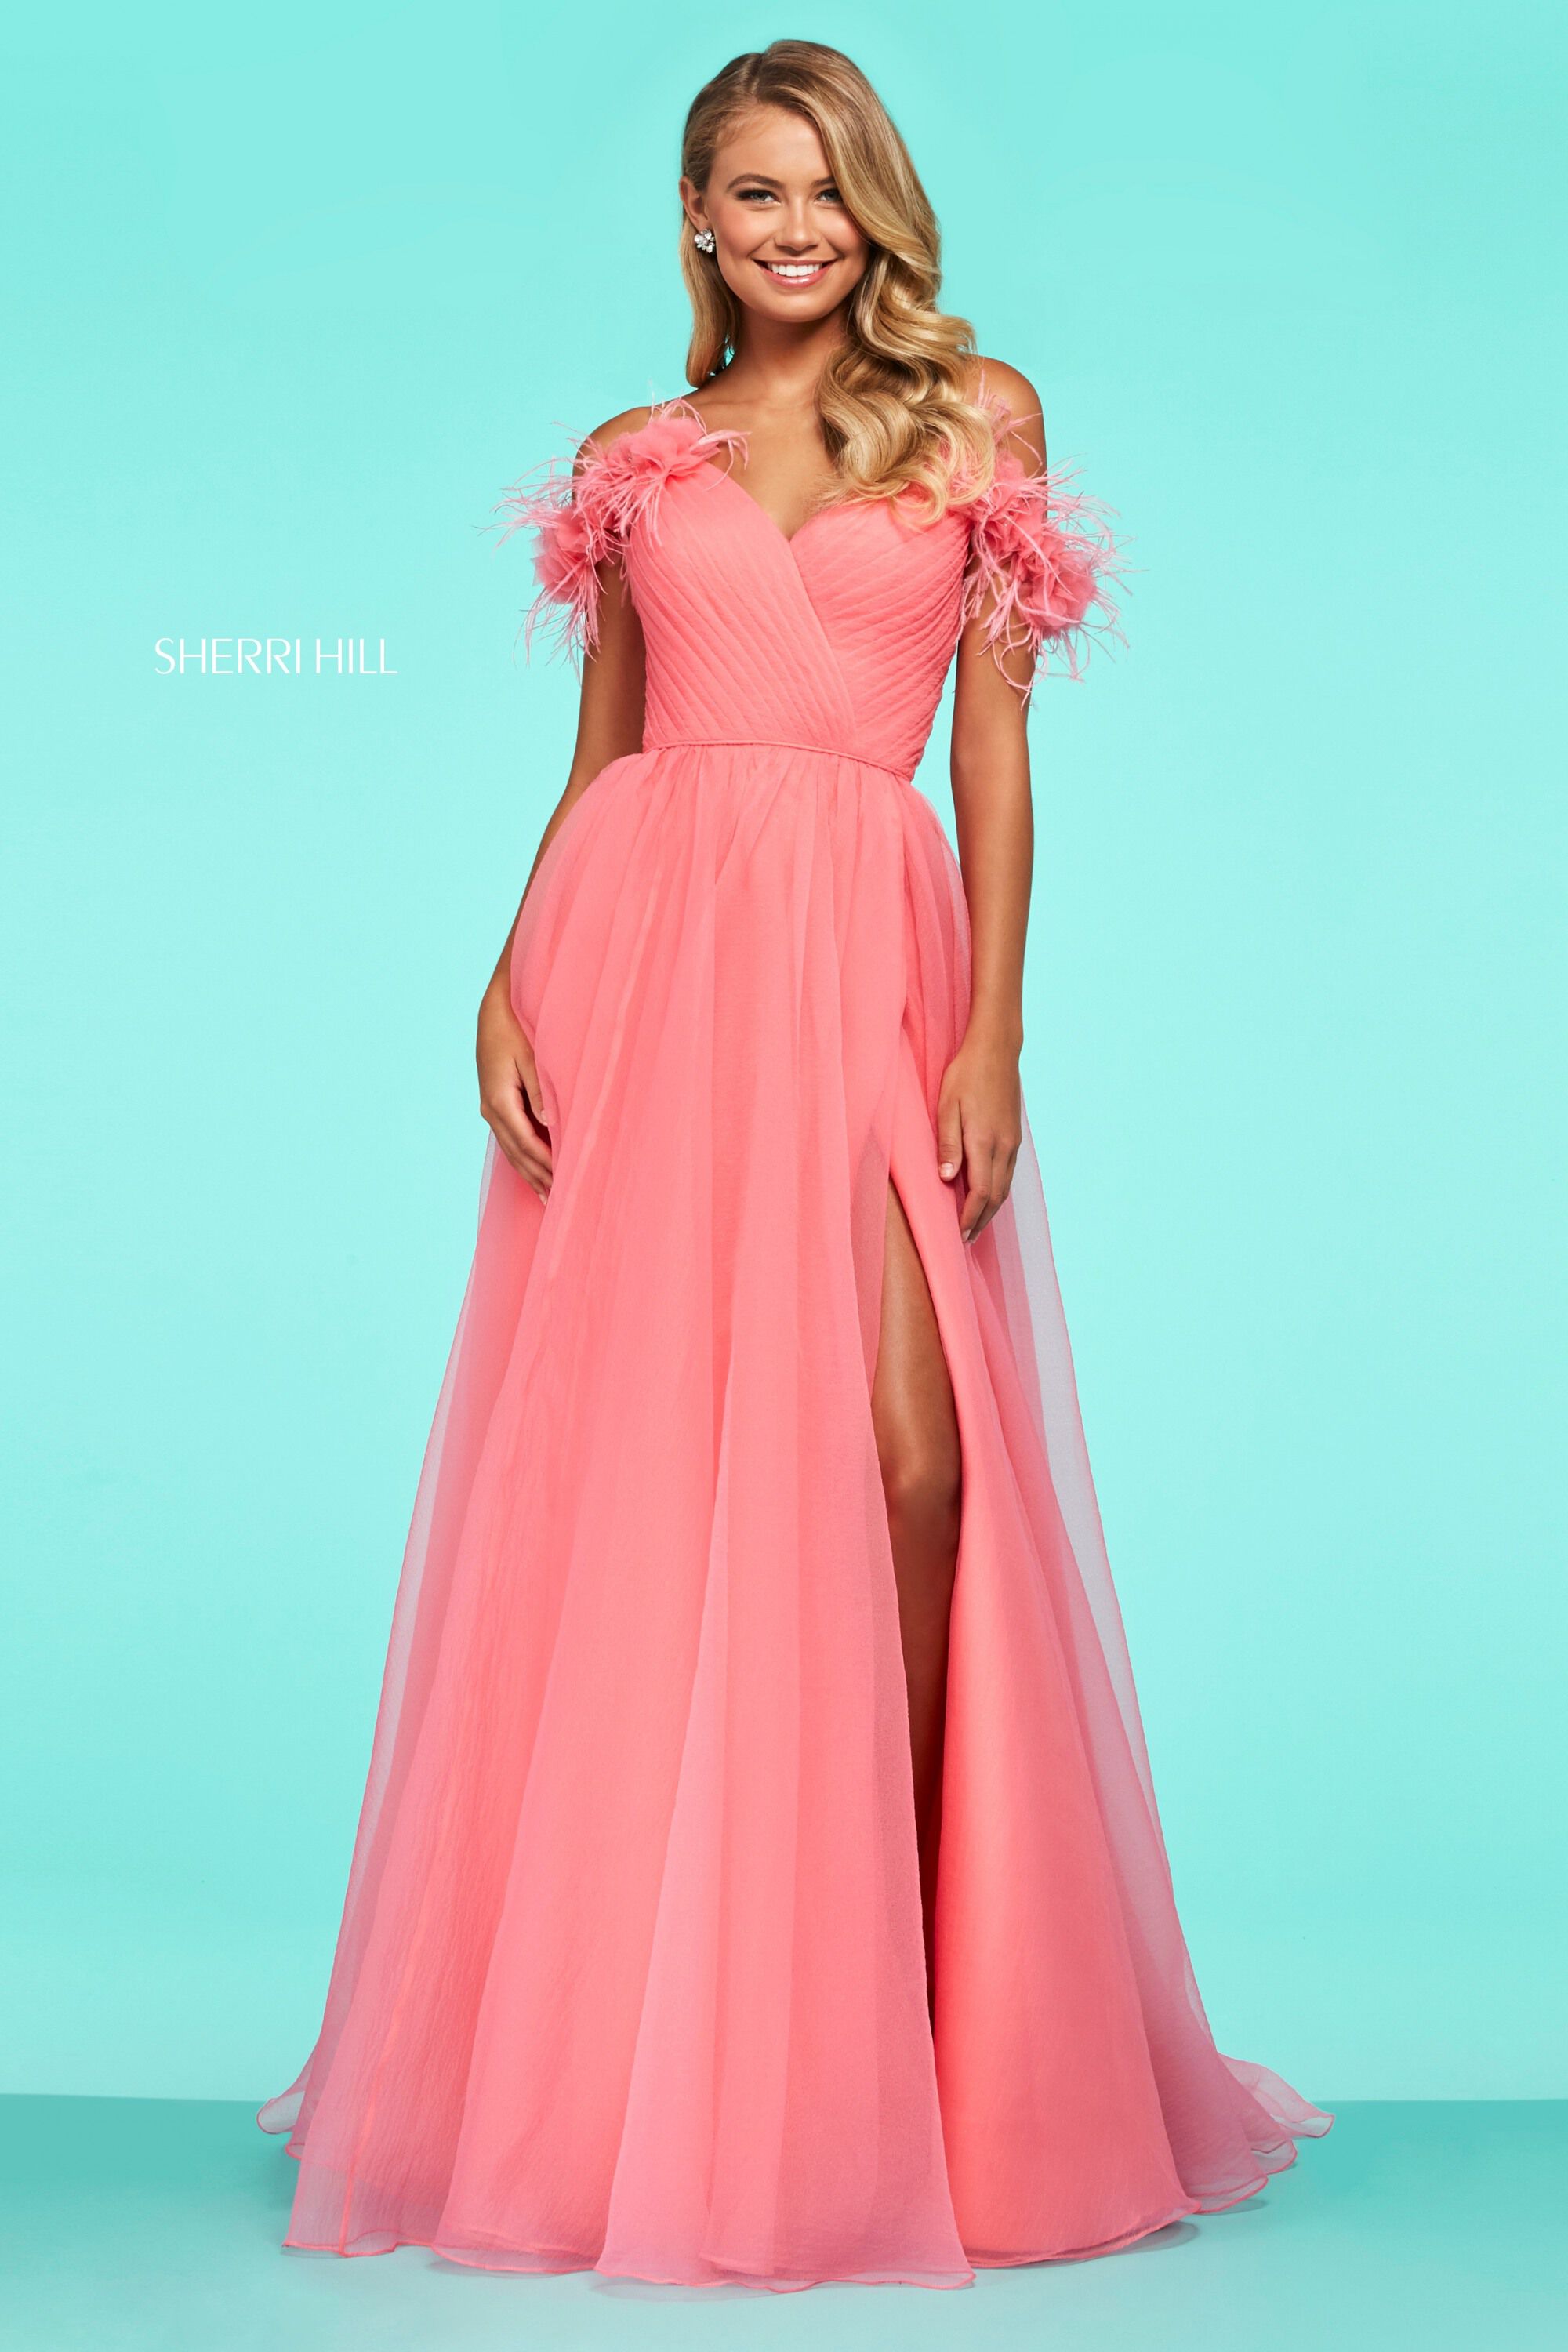 Sherri Hill Spring 2020 Collection ...